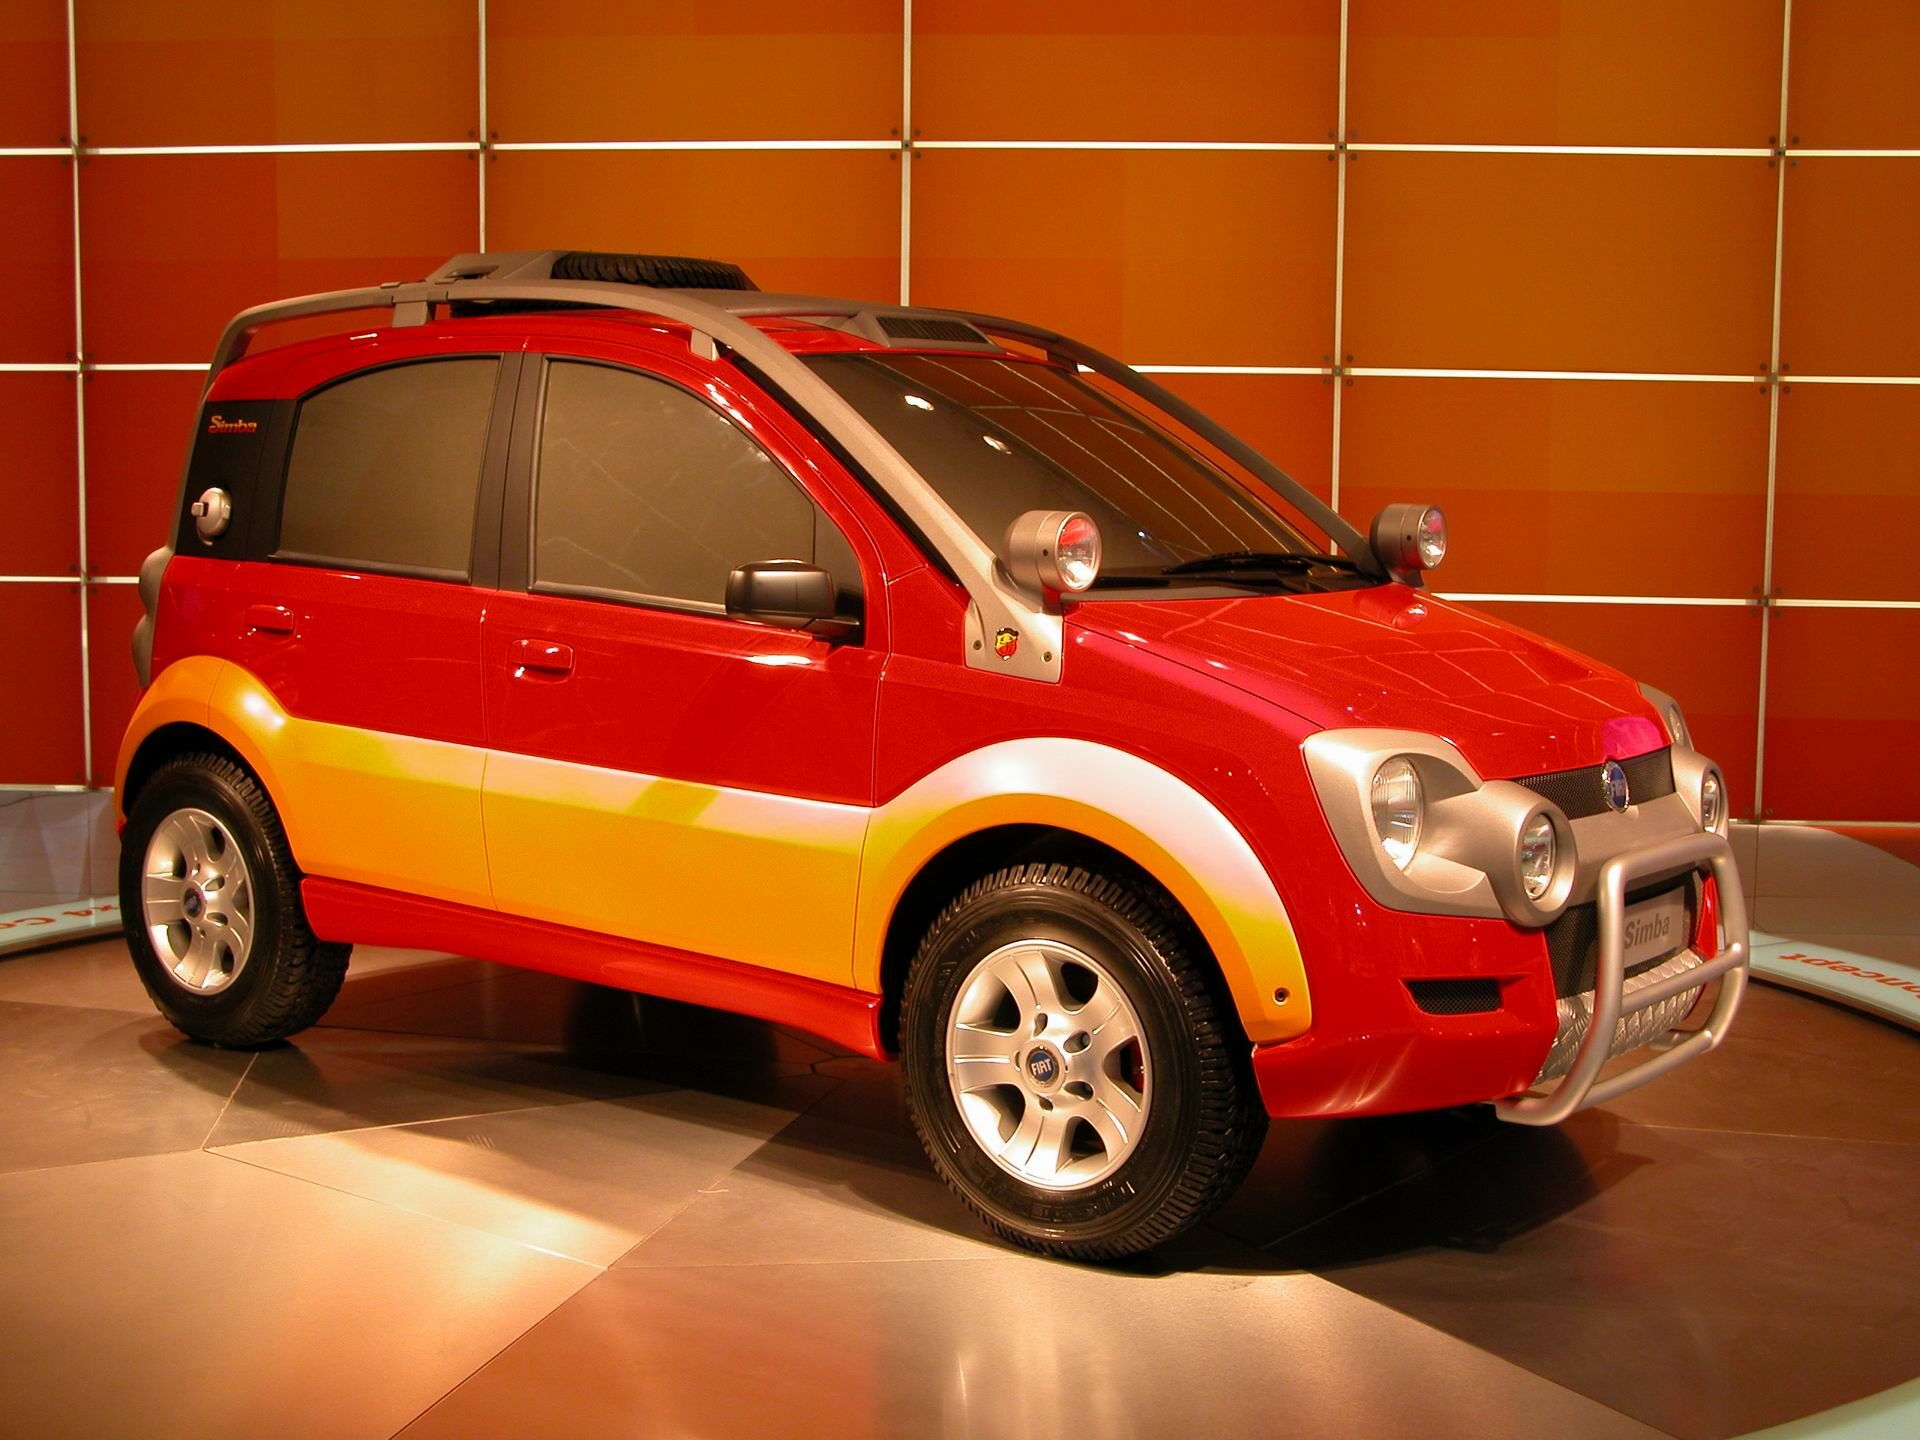 the Fiat Simba concept at the 2003 Barcelona Motor Show